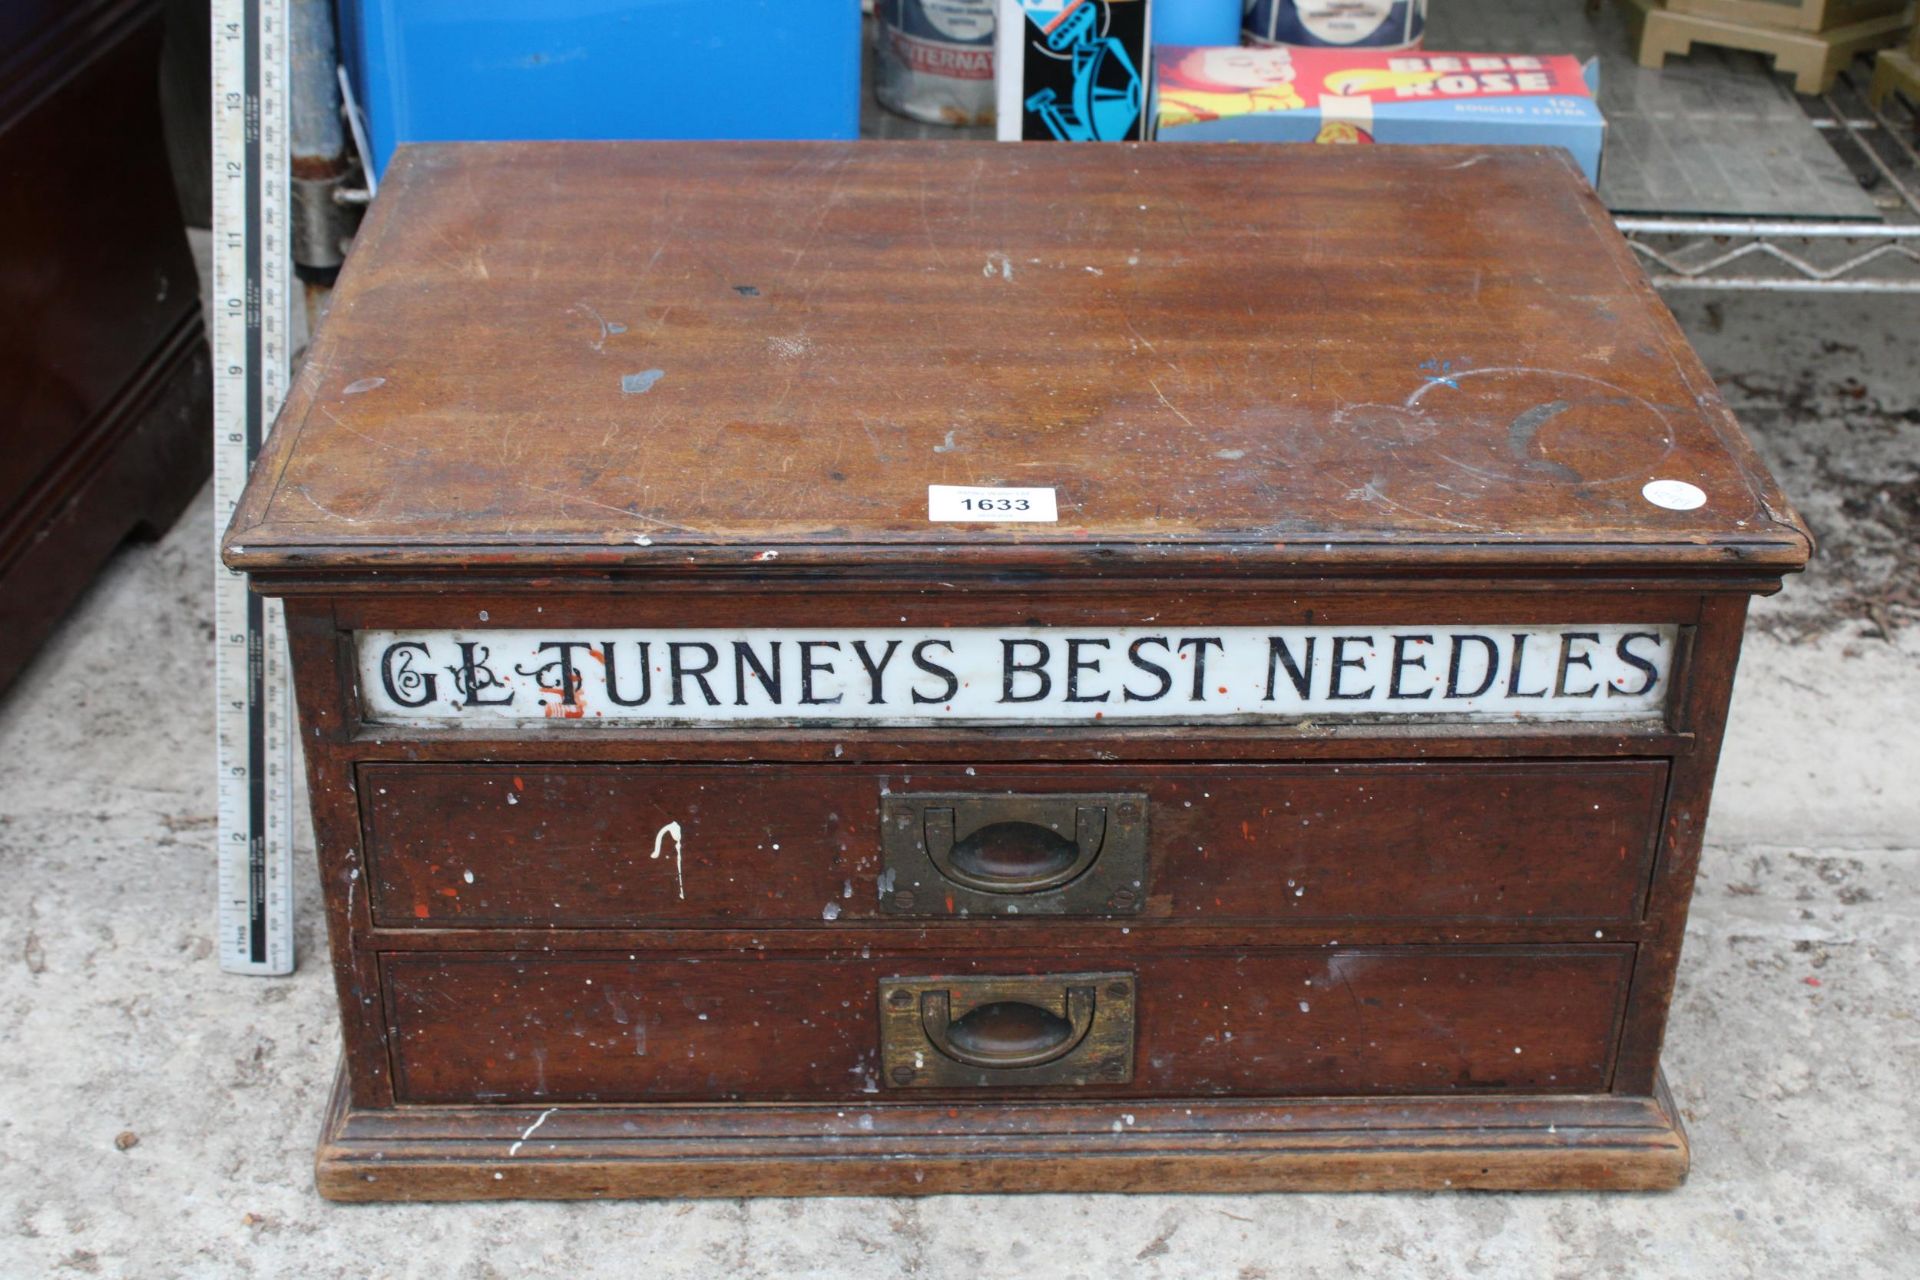 A VINTAGE MAHOGANY TWO DRAWER SEWING CHEST BEARING THE LABEL G L TURNEYS BEST NEEDLES